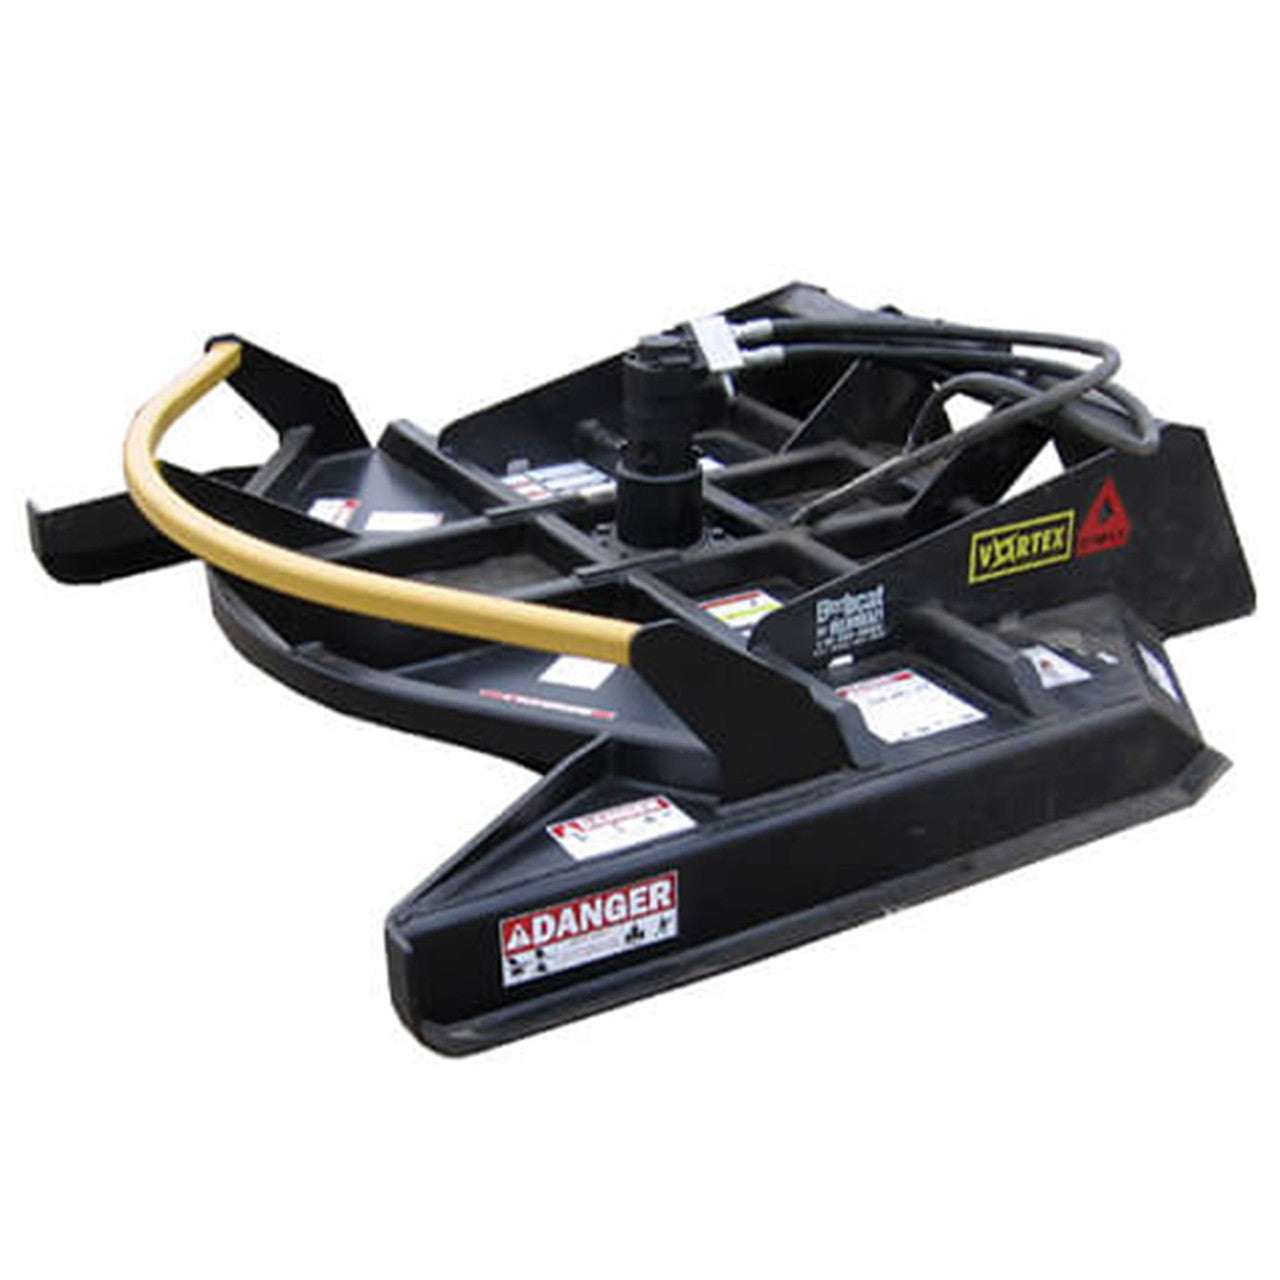 MAXX VORTEX BRUSH CUTTER WITH DUAL DISCHARGE DECK FOR SKID STEER